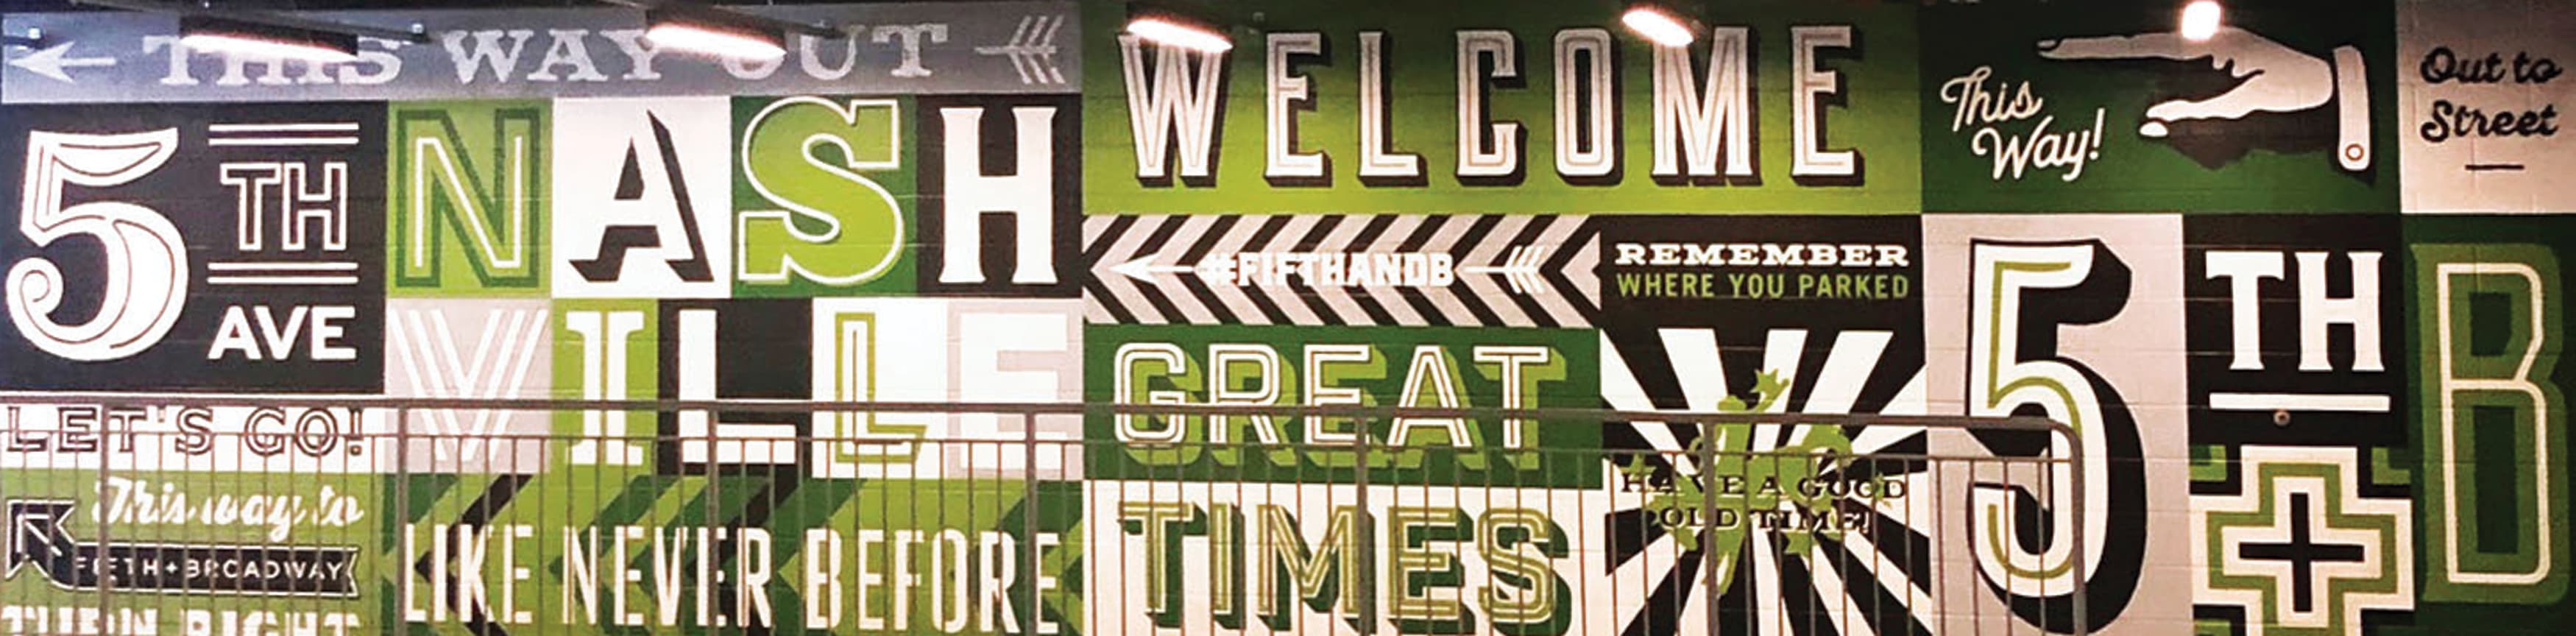 Specialty parking garage mural wall in color blocks of green, black and white with directional graphics to Fifth + Broadway. Signage and wayfinding for Fifth + Broadway in Nashville, Tennessee by RSM Design